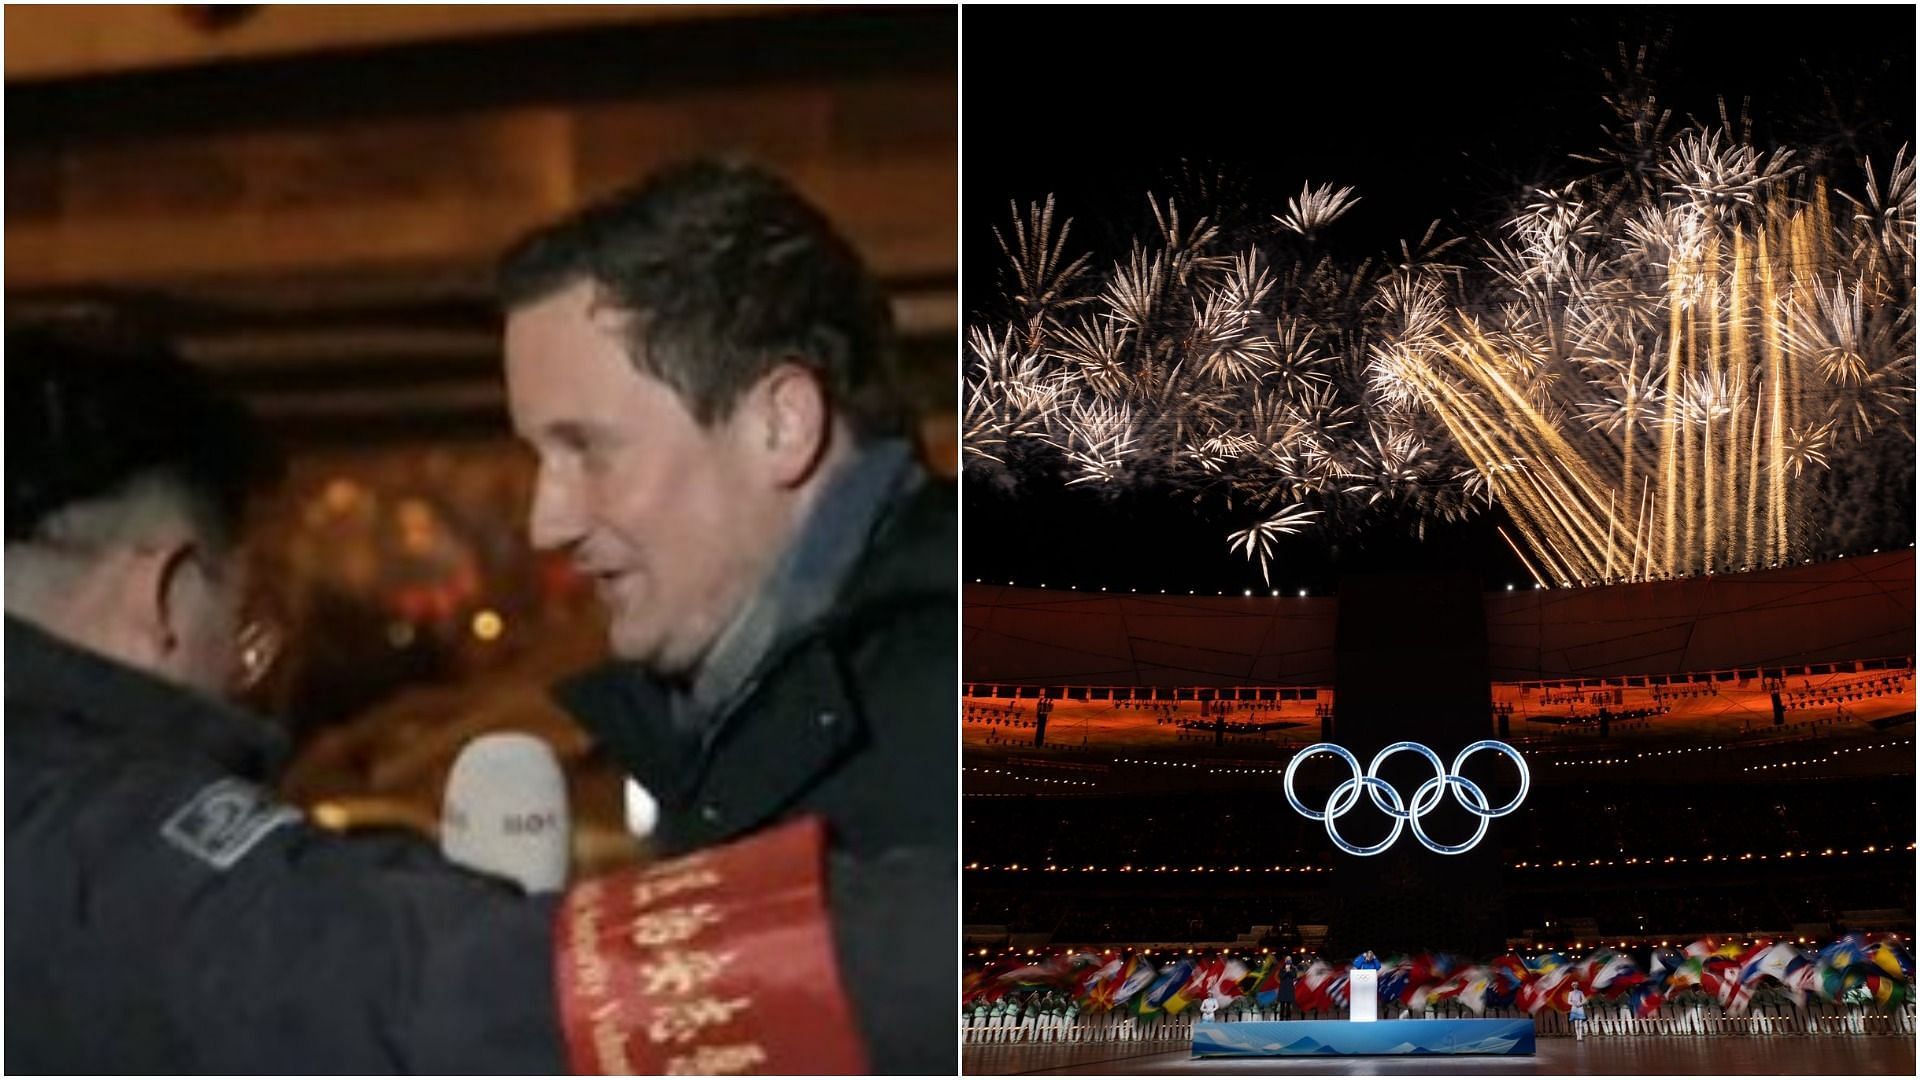 Dutch reporter manhandled while reporting the Winter Olympics opening ceremony (Pic Credit: NOS)